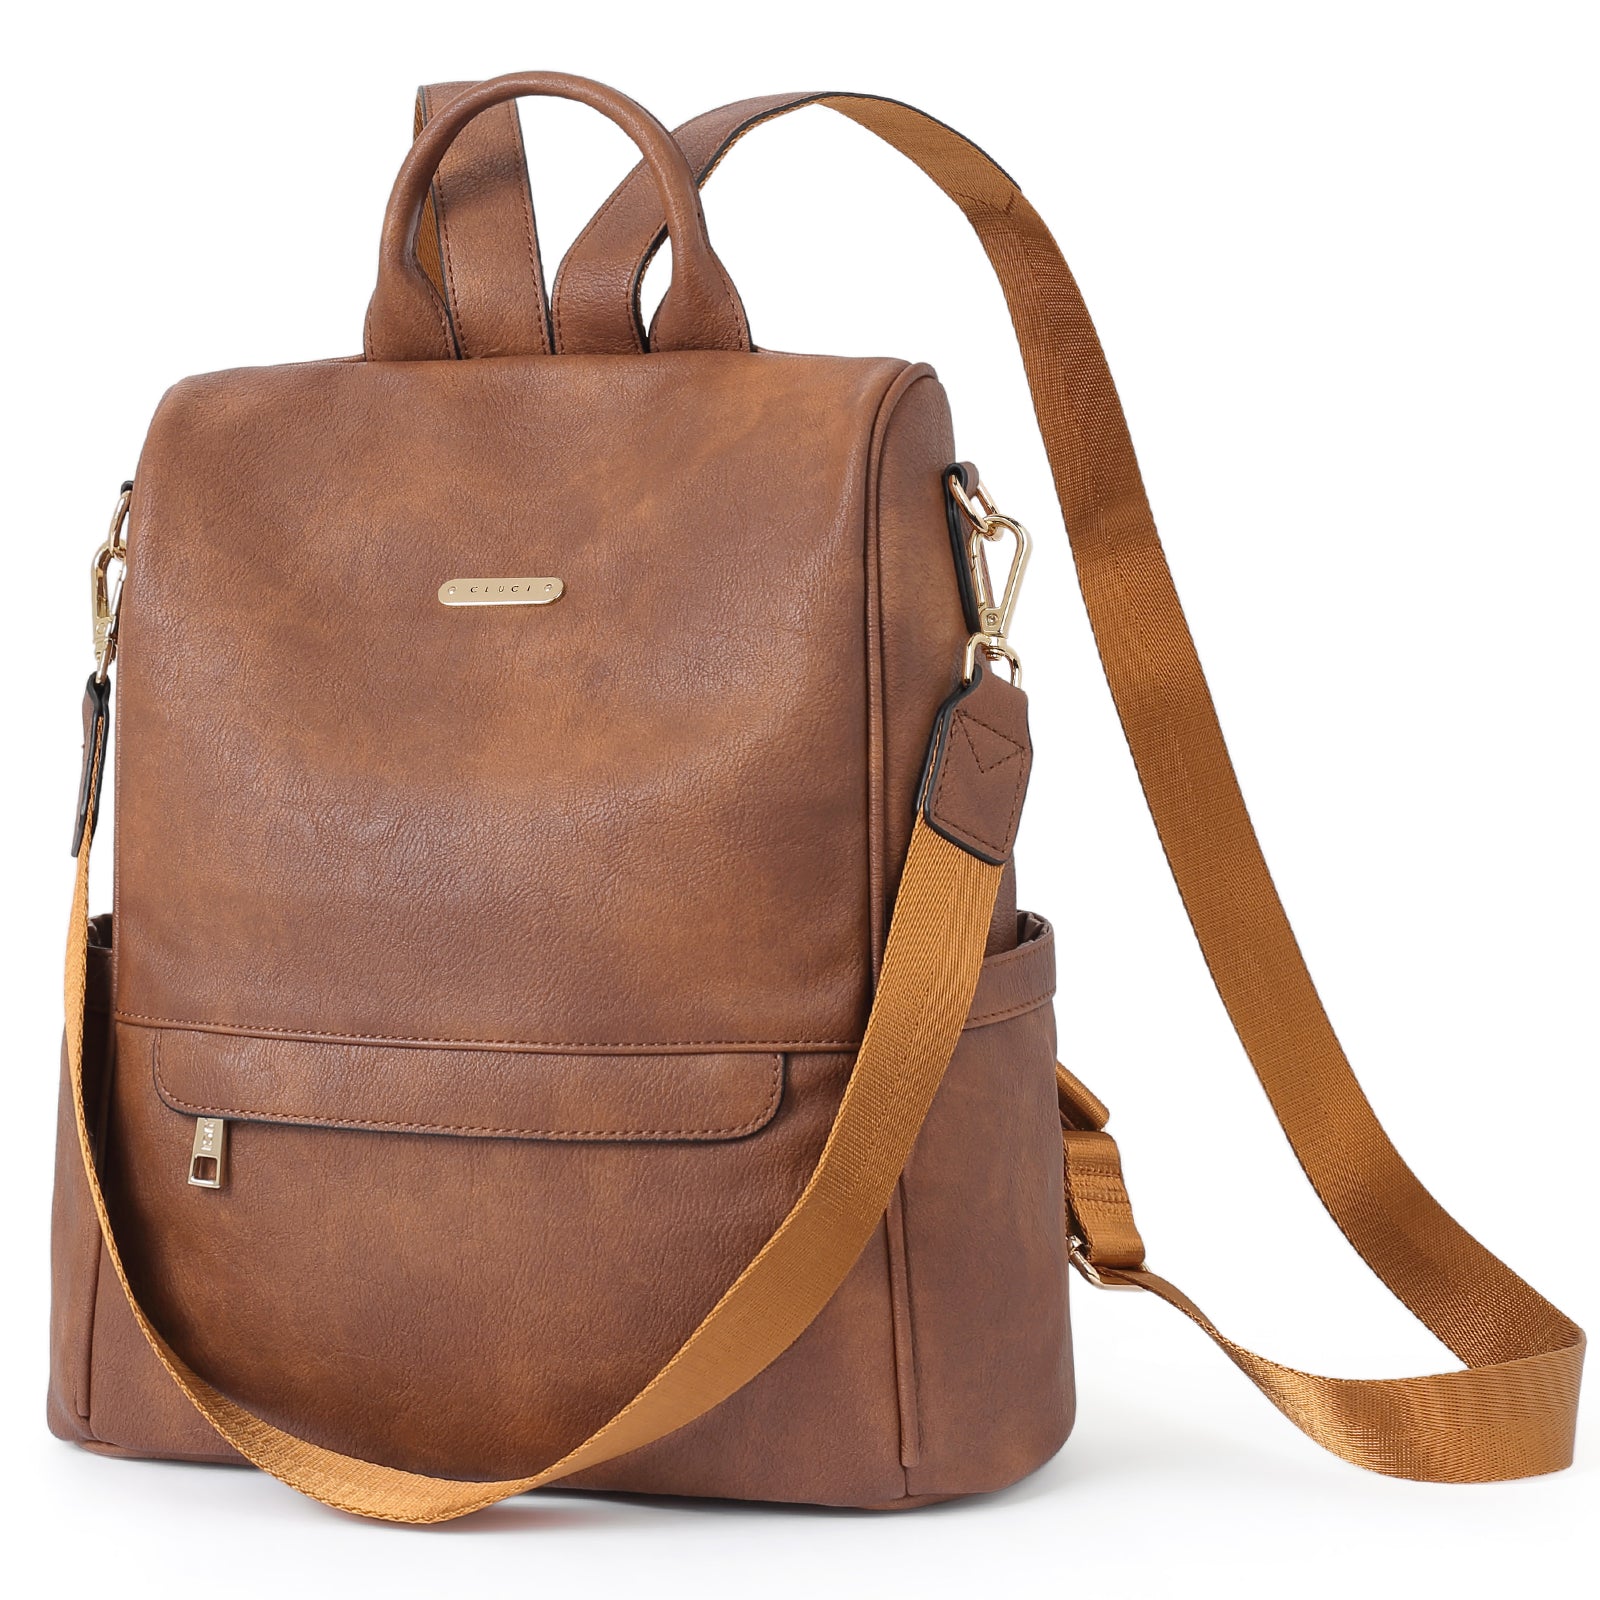 Greene Multi-Purpose Carry Way Vegan Leather Backpack Purse For Women | Two-Toned Vintage